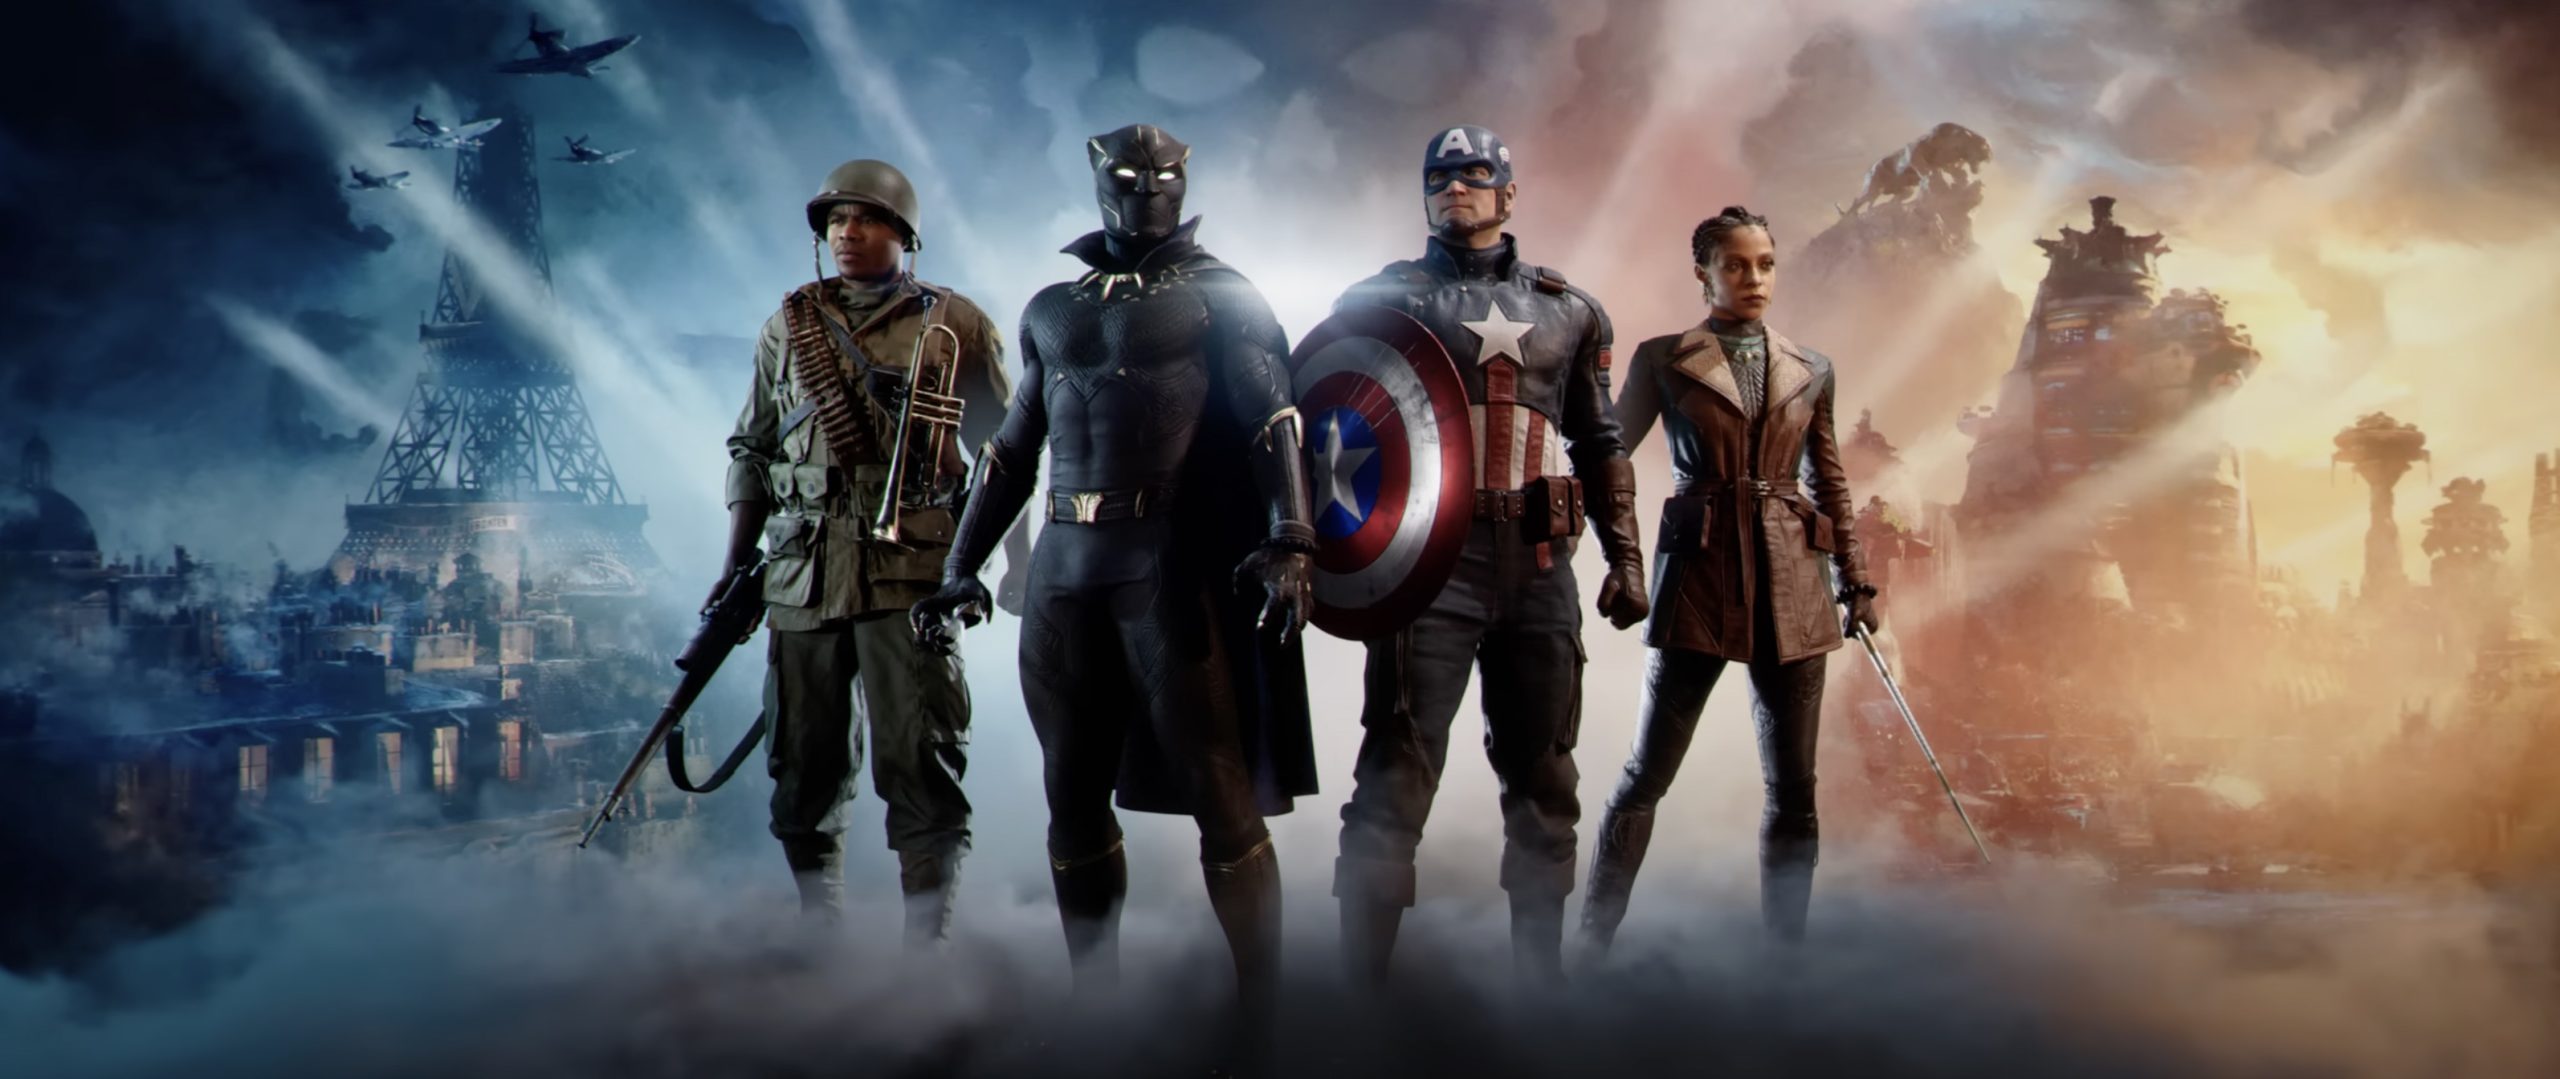 Marvel debuts first trailer for 1943: The Rise of Hydra game starring Black Panther and Captain America